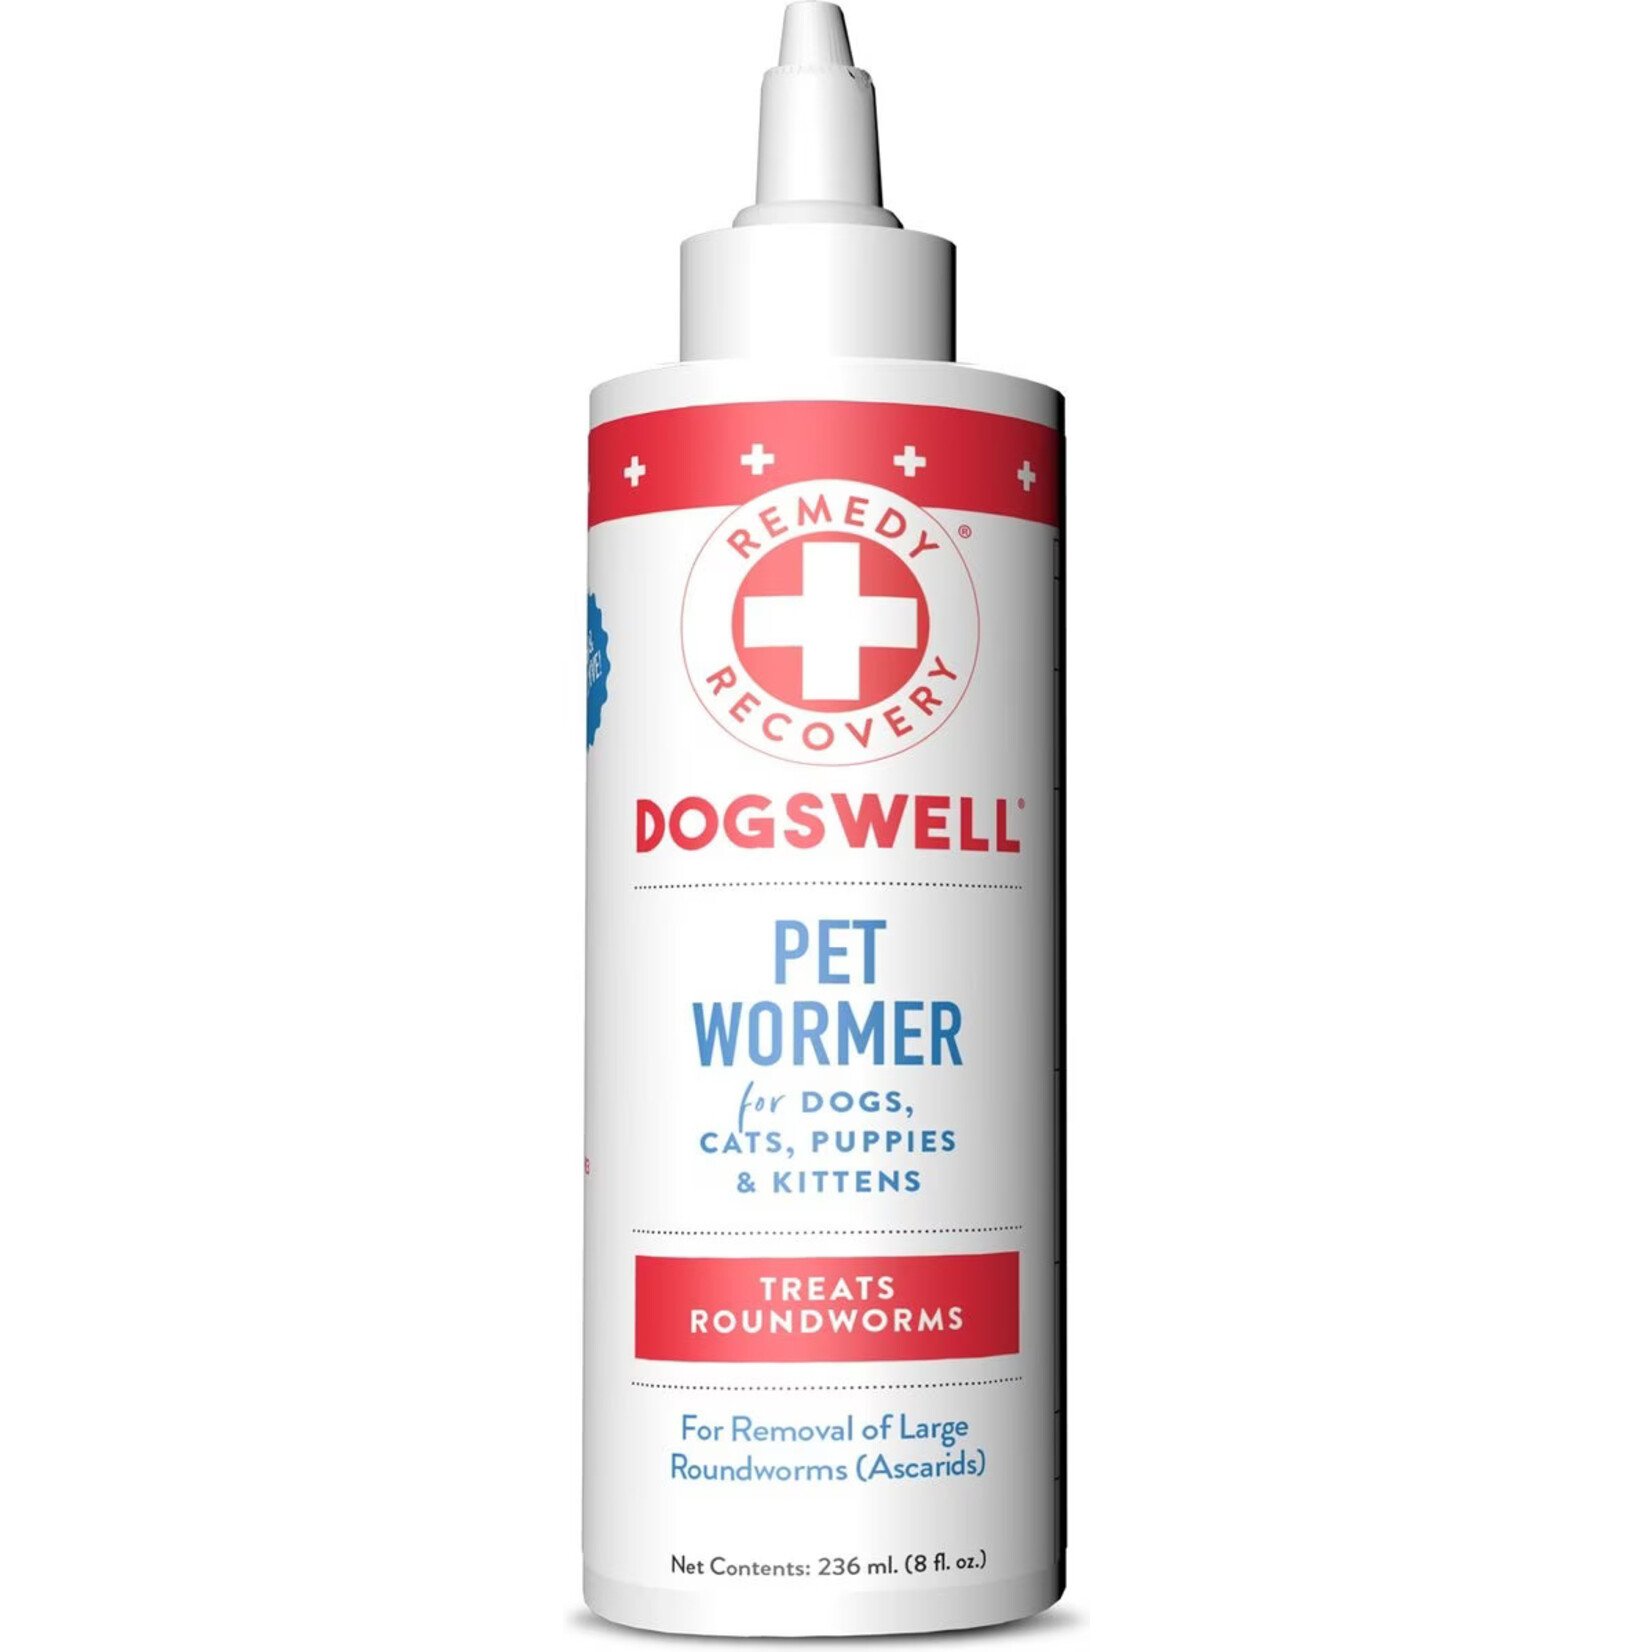 Dogswell Dogswell Remedy+Recovery - Pet Wormer